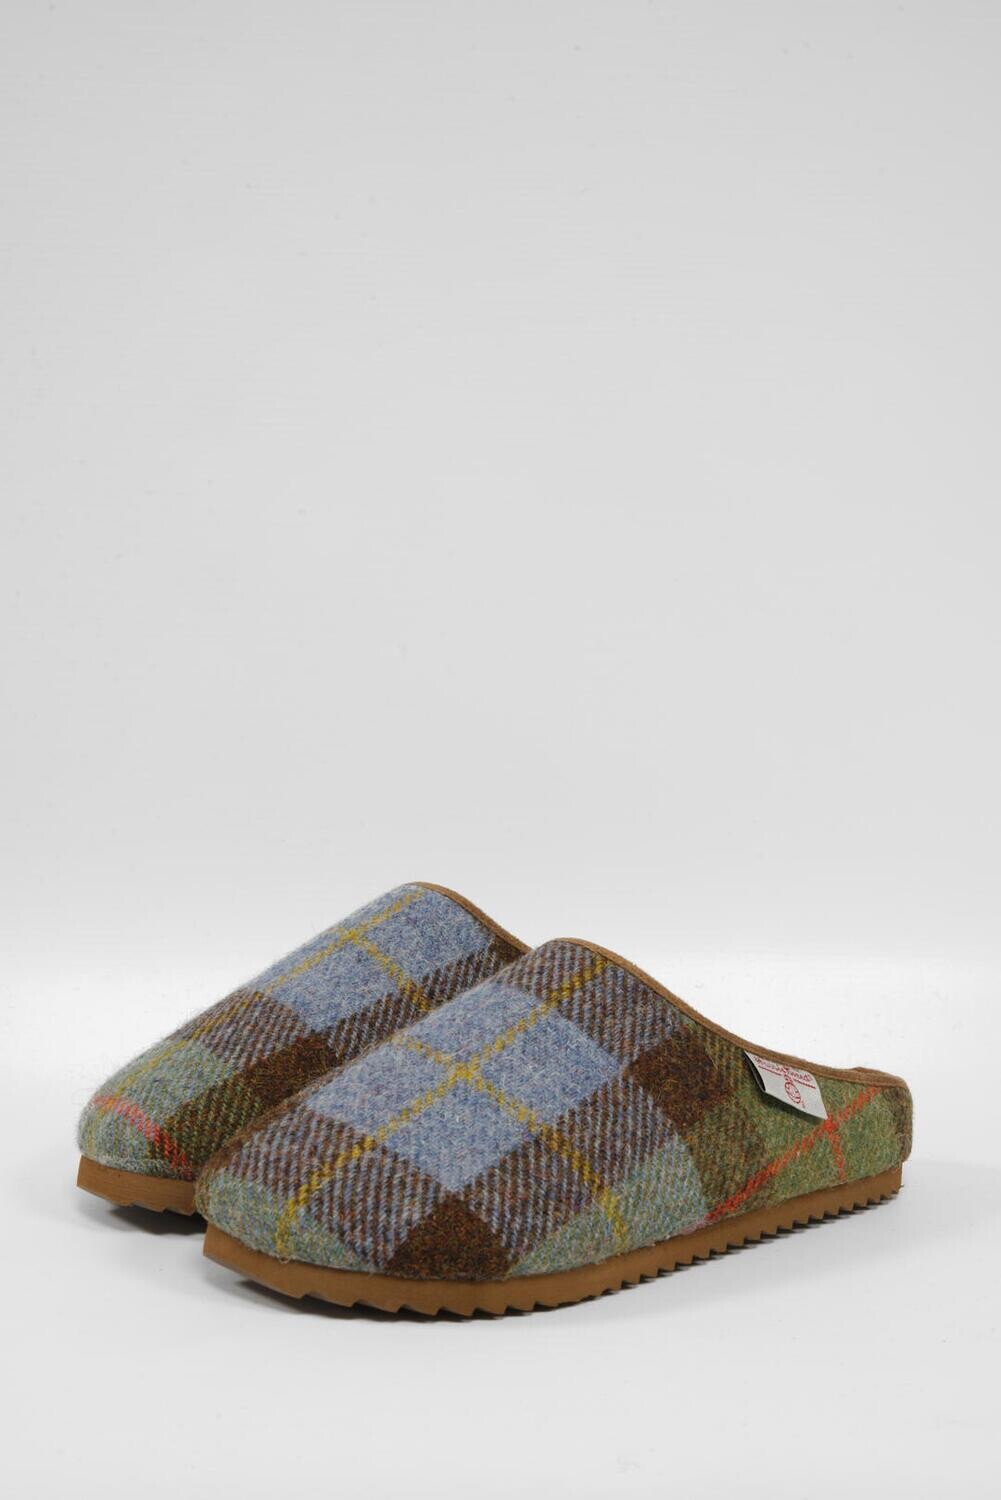 Harris Tweed Archie Clogs | Chocolate/Green Check